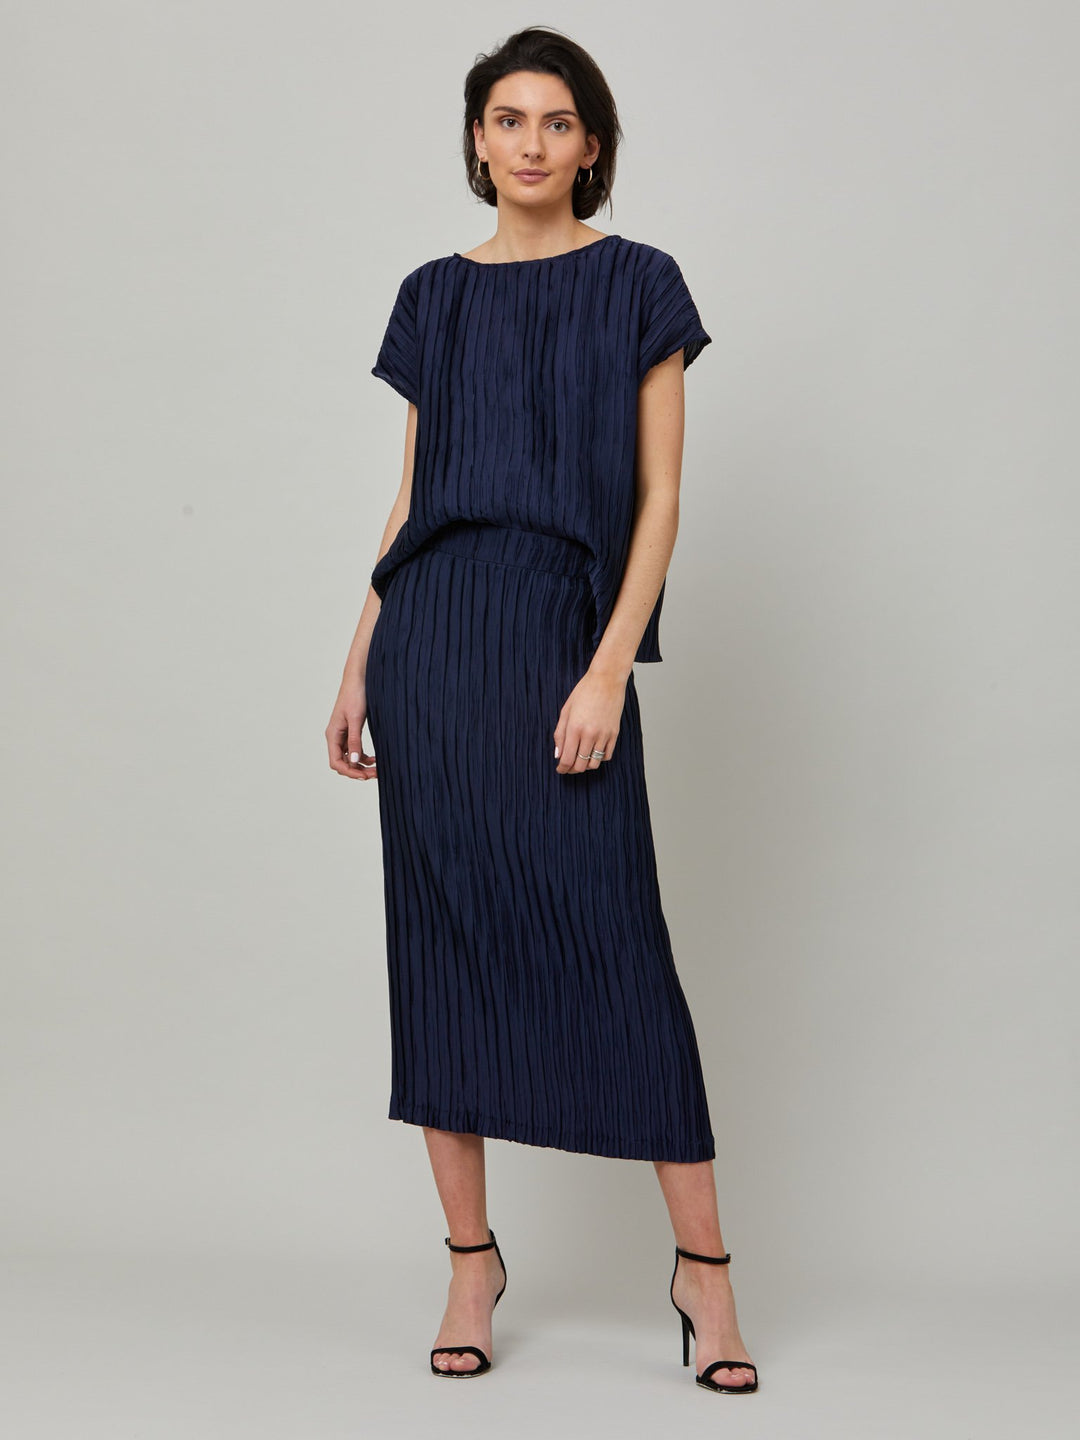 Lucy, our classic shell top is redefined in polished navy pleated fabric. A simple wardrobe essential, the perfect foil for the matching Roz navy pleated skirt.